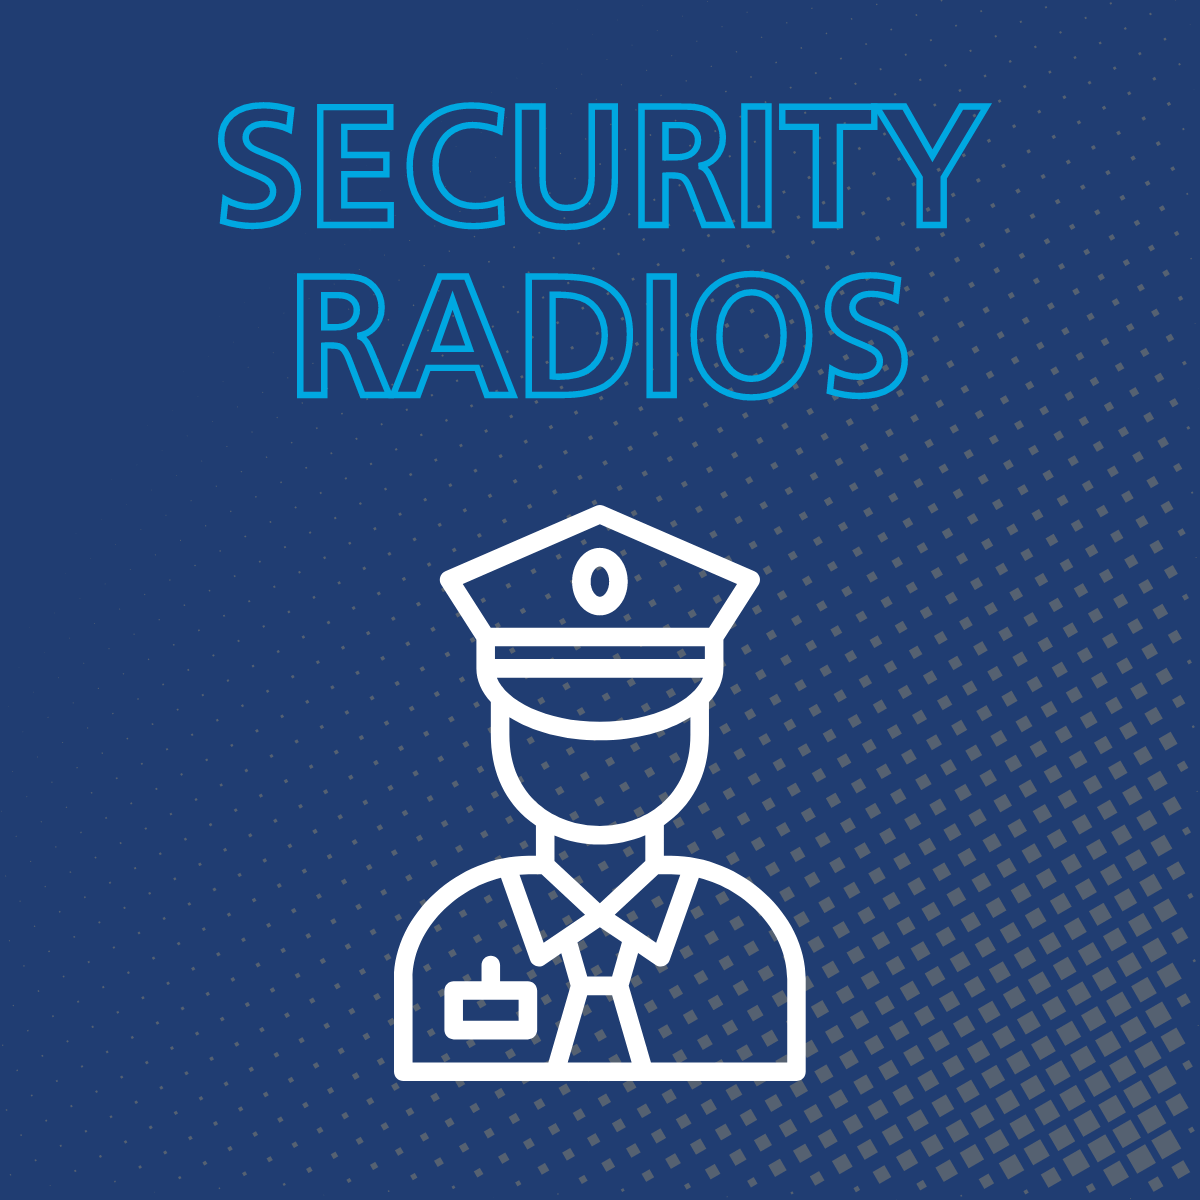 Two Examples of How to Use Security Radios Effectively